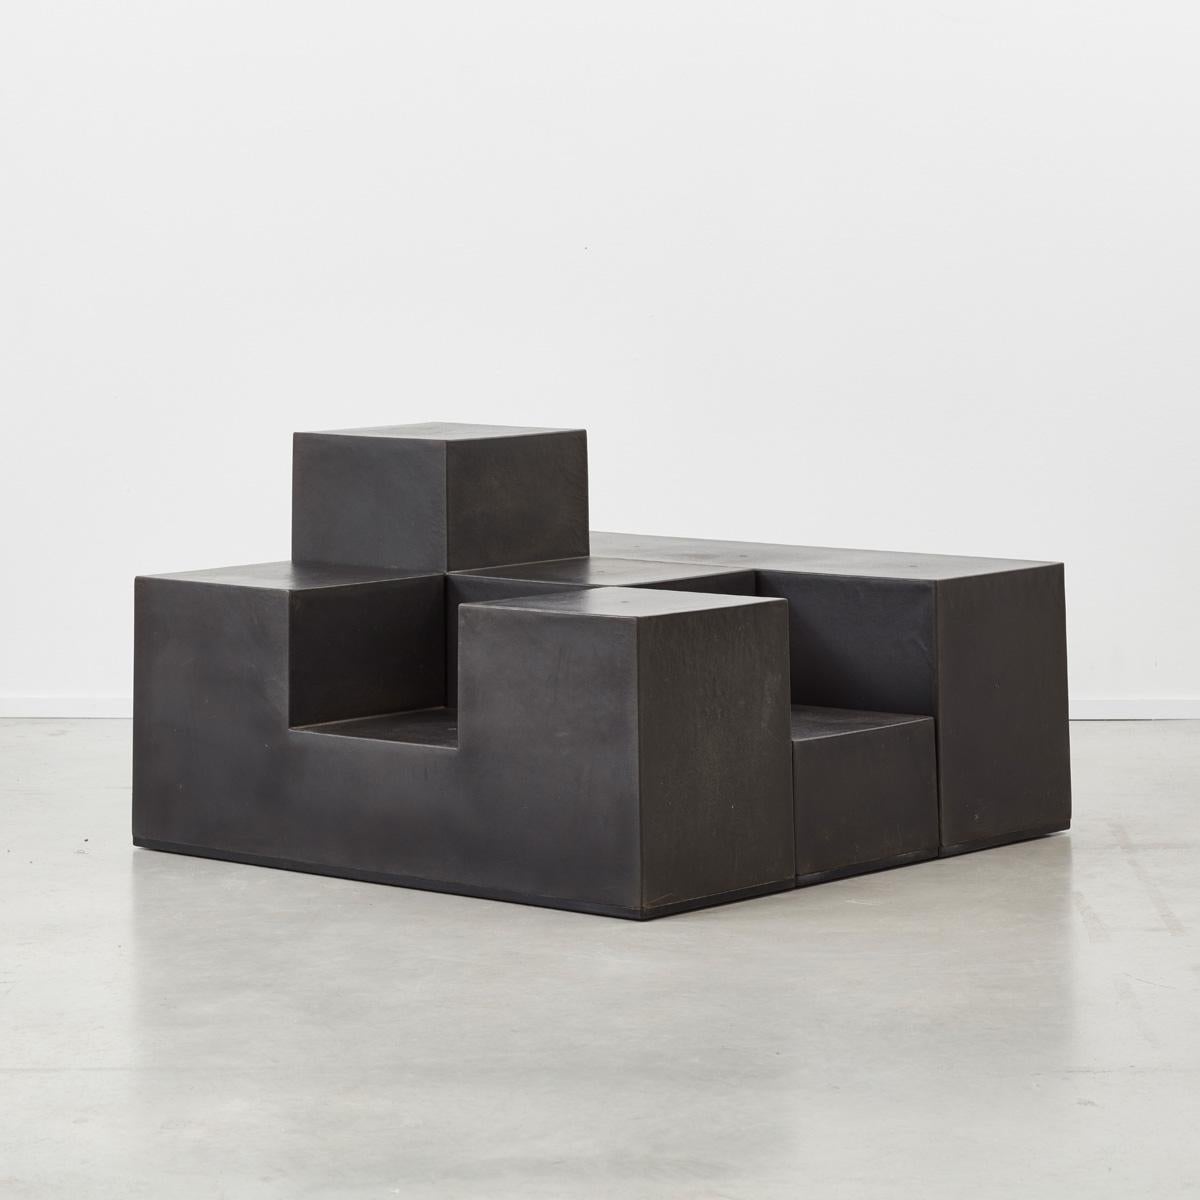 Italian architect Mario Bellini is well known for creating powerful, thoughtful and creative pieces of design. The Gli Chess series works both as modular tables or seating. The versatility in interconnectivity between the differing forms places